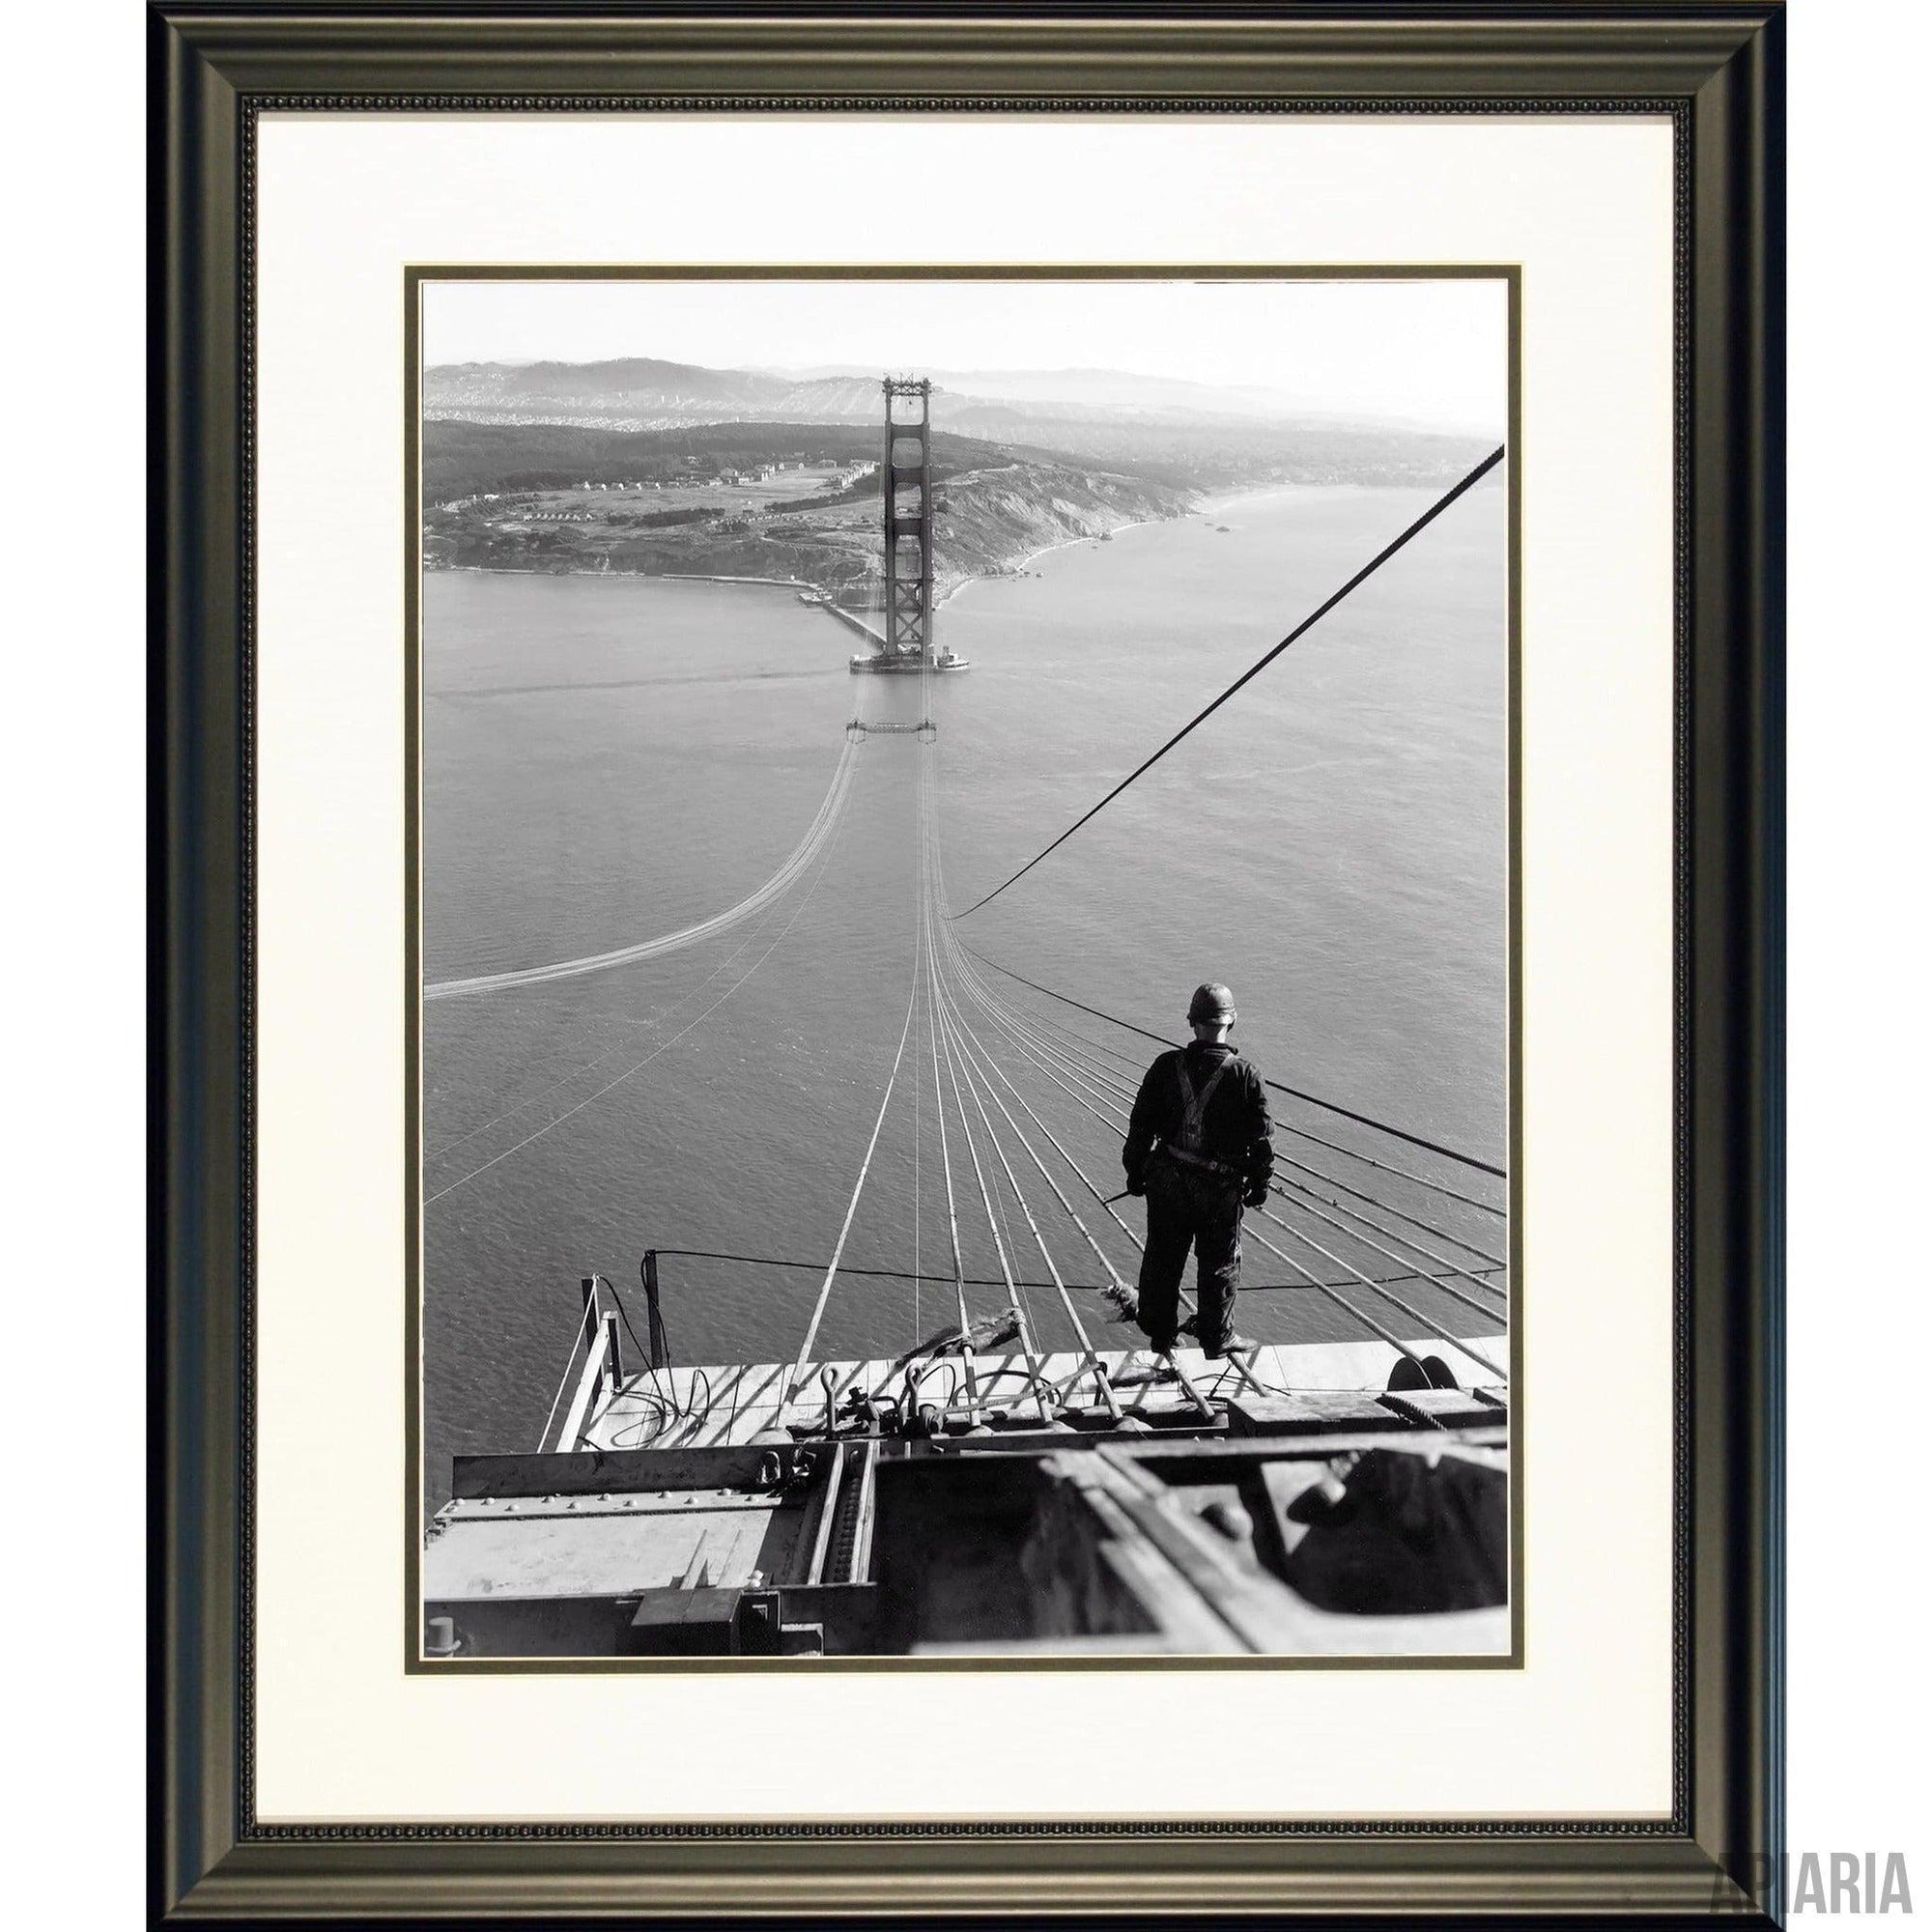 Man Looks Towards The Presidio While Standing On Cables During Construction of Golden Gate Bridge, 1935-Framed Item-Apiaria